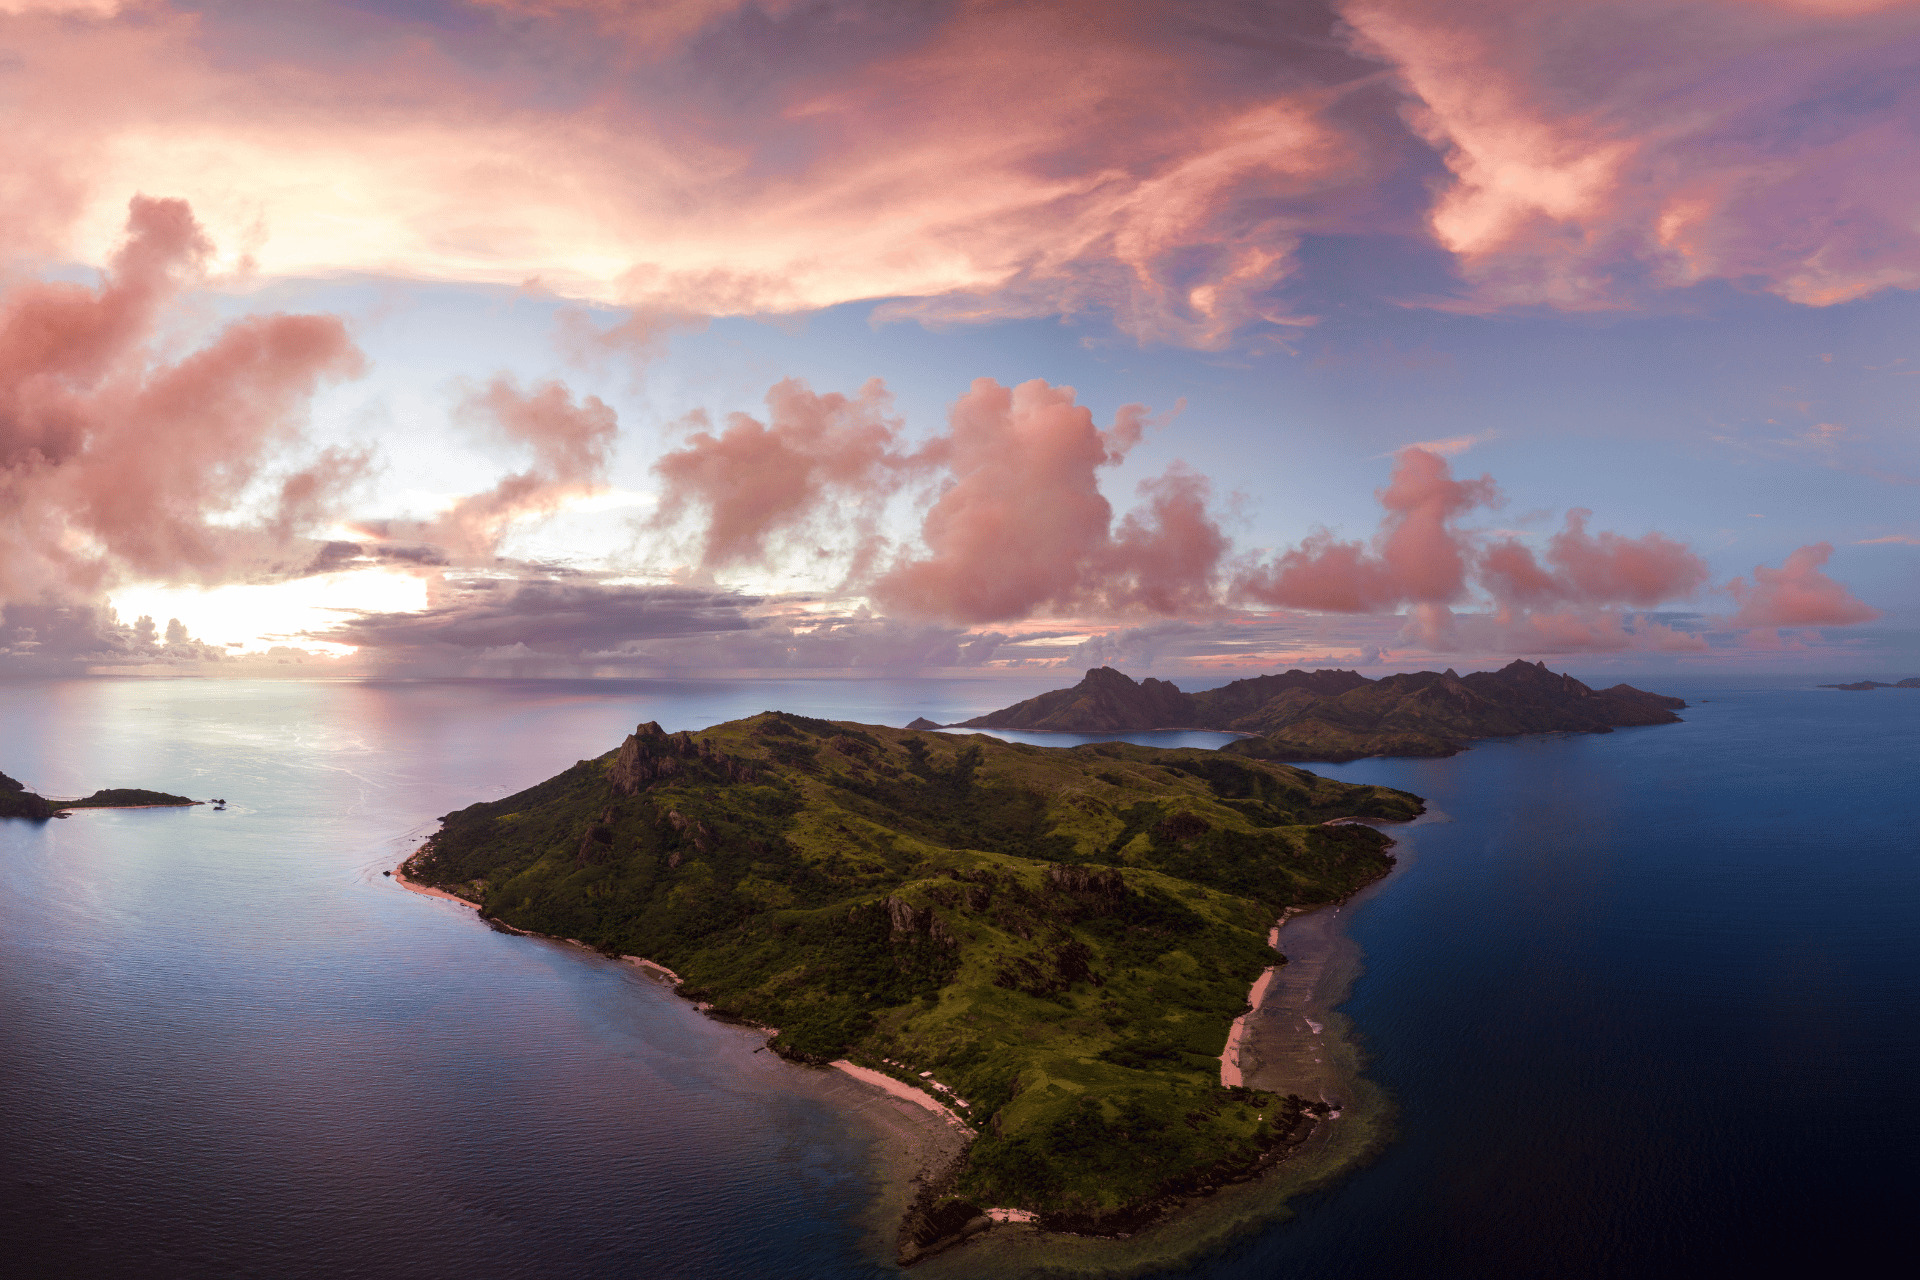 An aerial view of the island of Fiji with pink clouds.